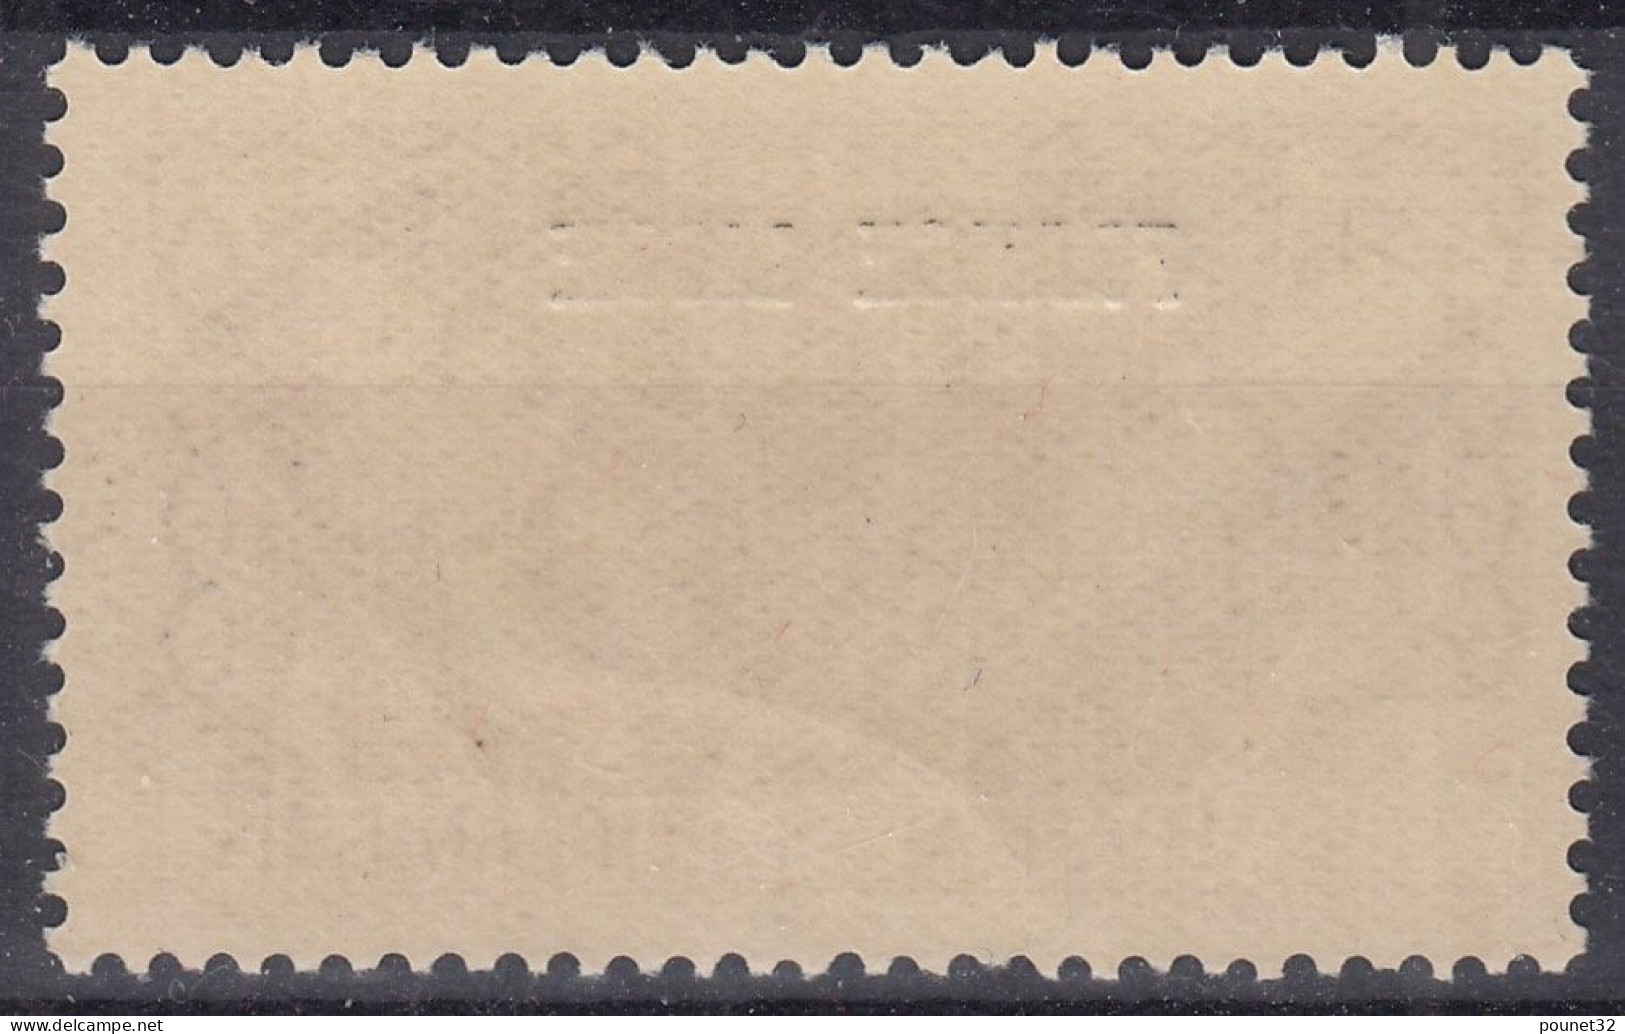 TIMBRE OCEANIE FRANCE LIBRE N° 144 NEUF GOMME COLONIALE SANS CHARNIERE - Nuevos